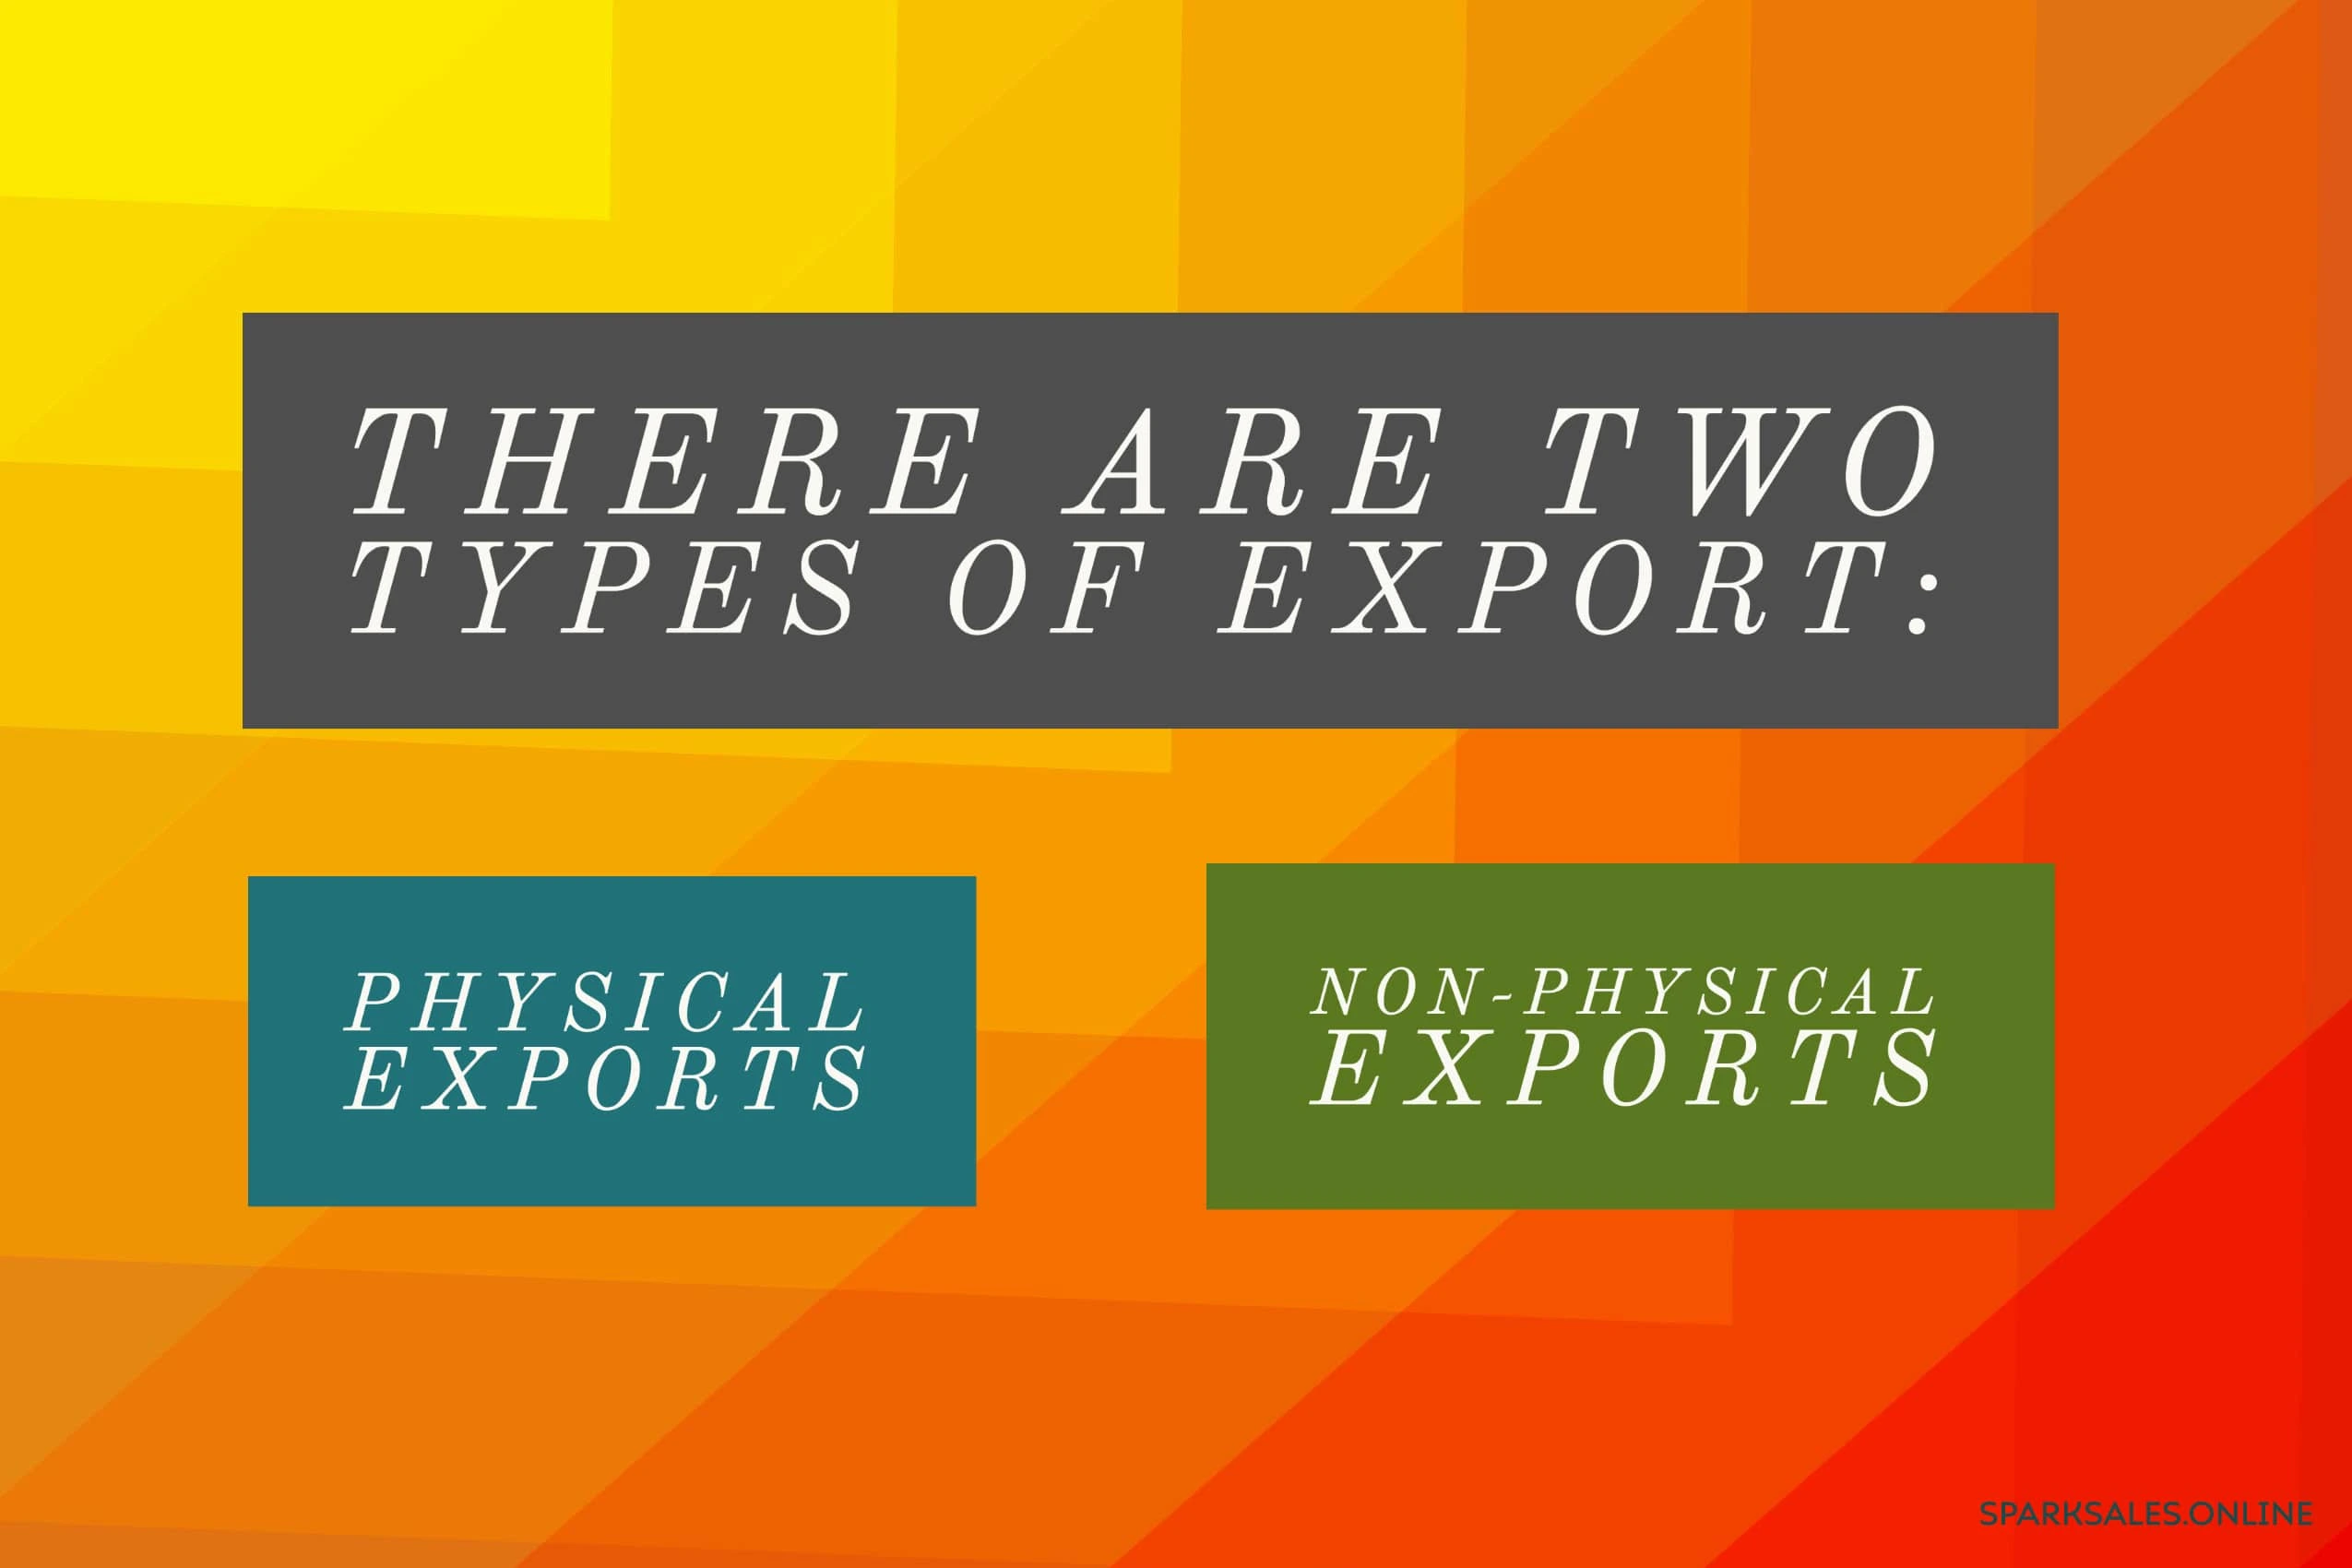 The two different types of export